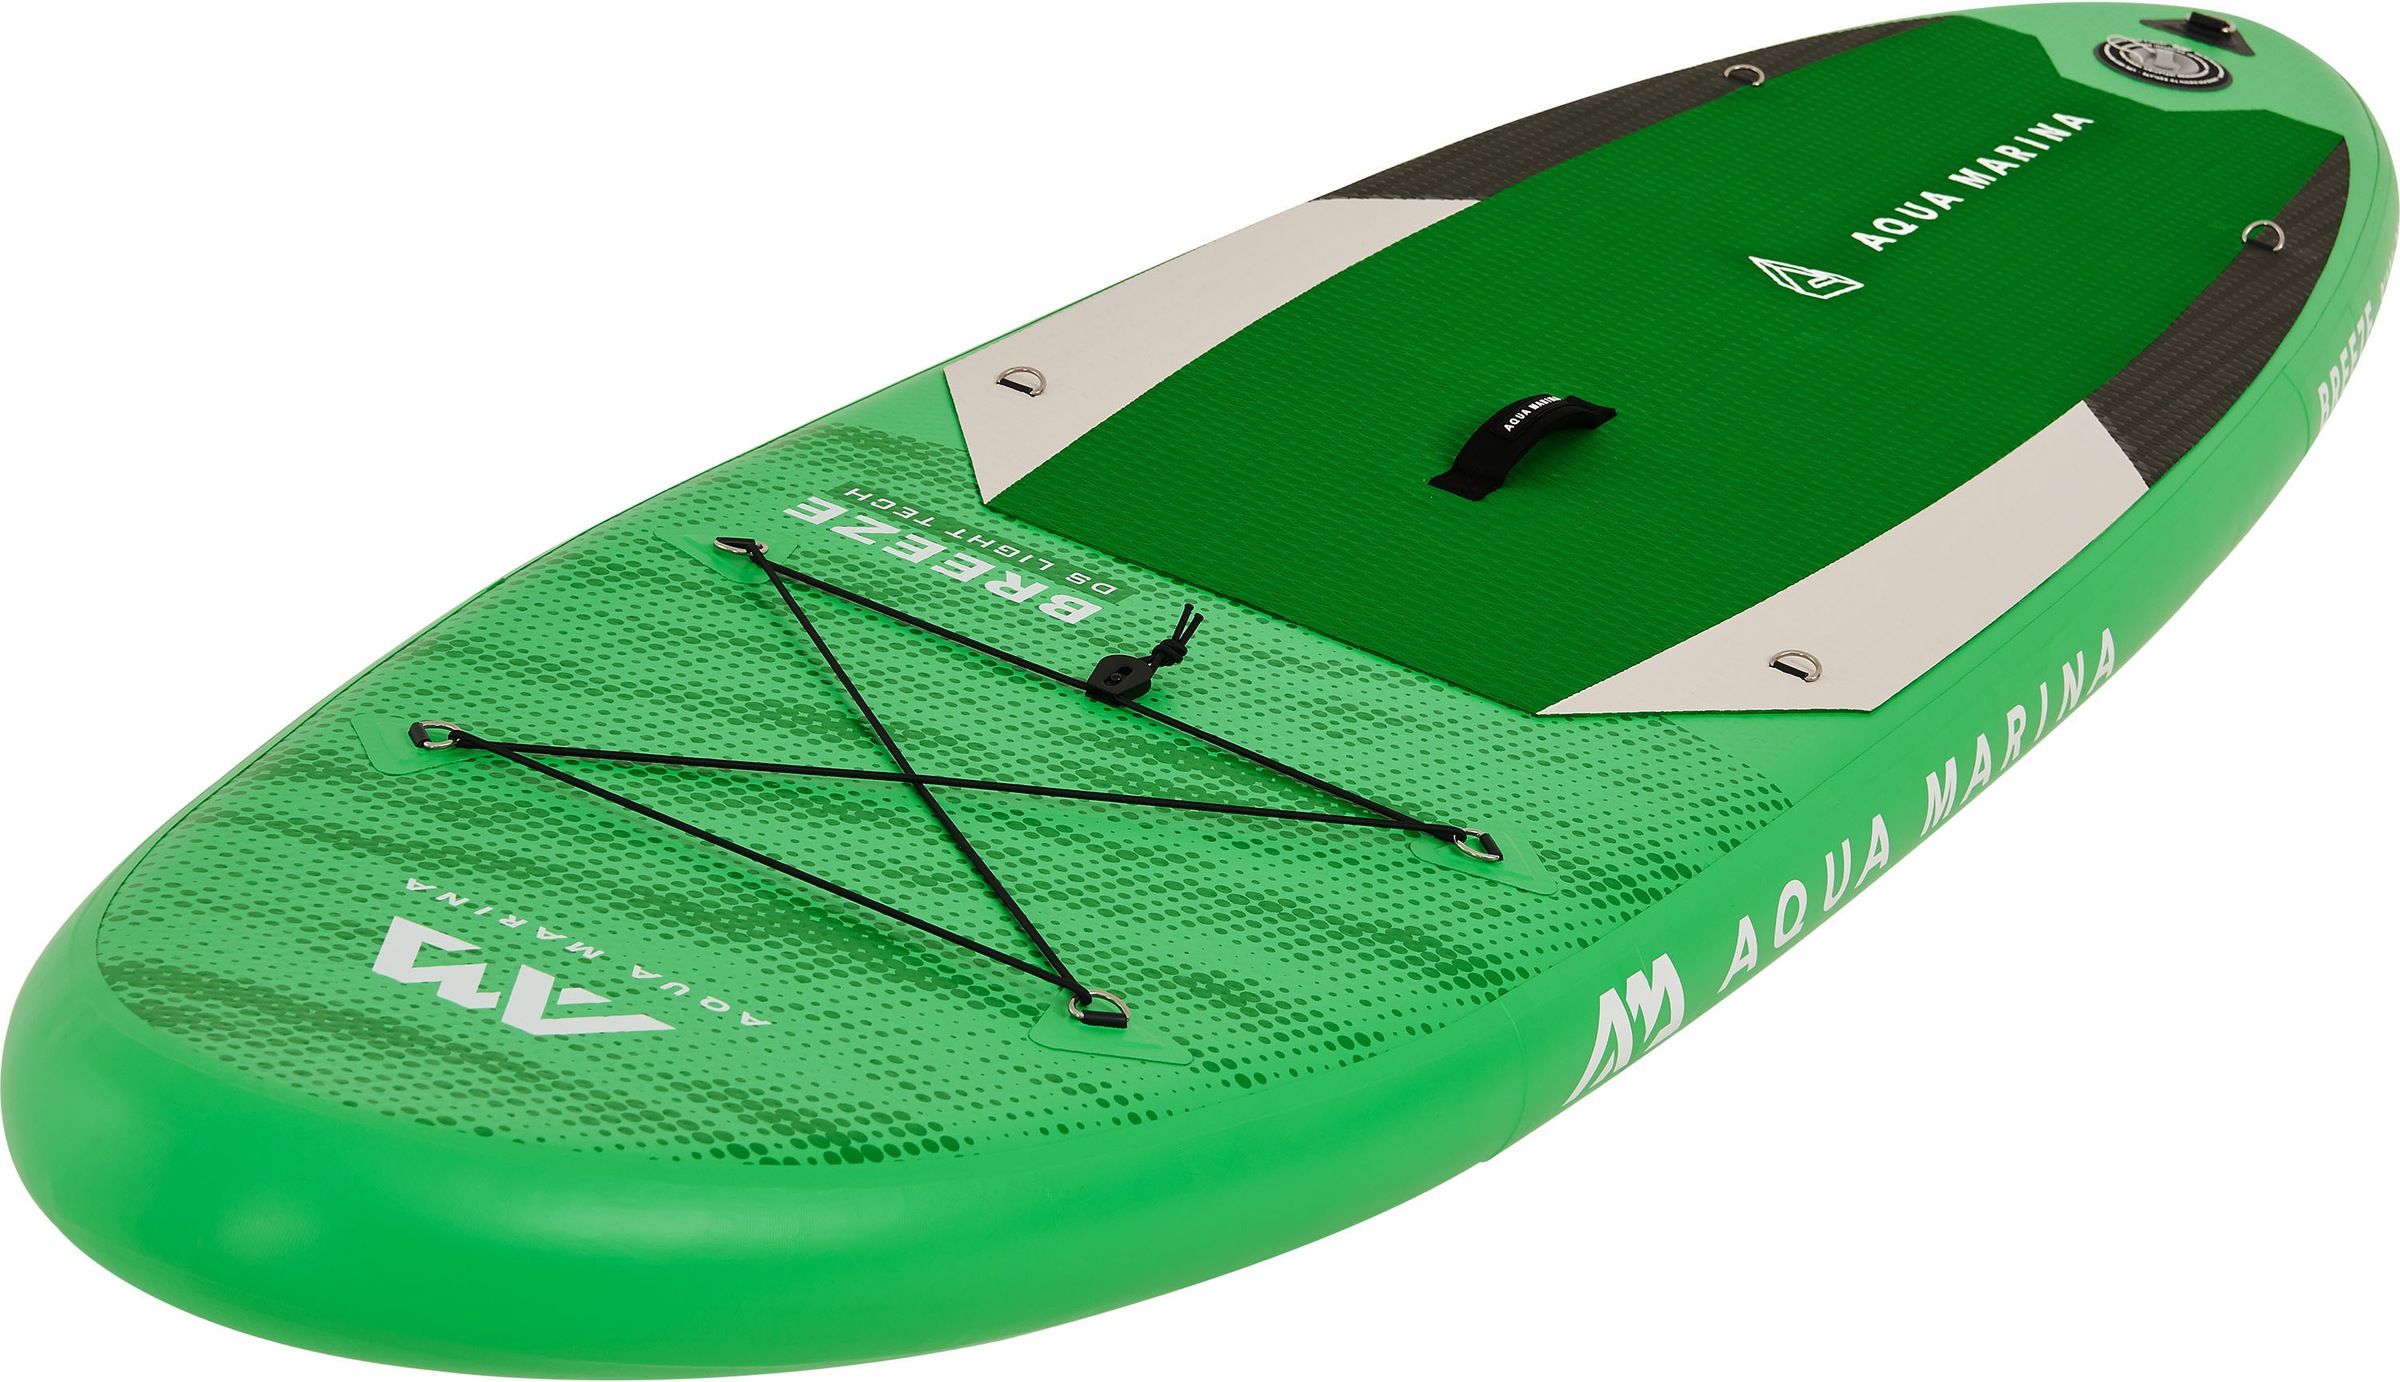 Stabd-Up Paddle